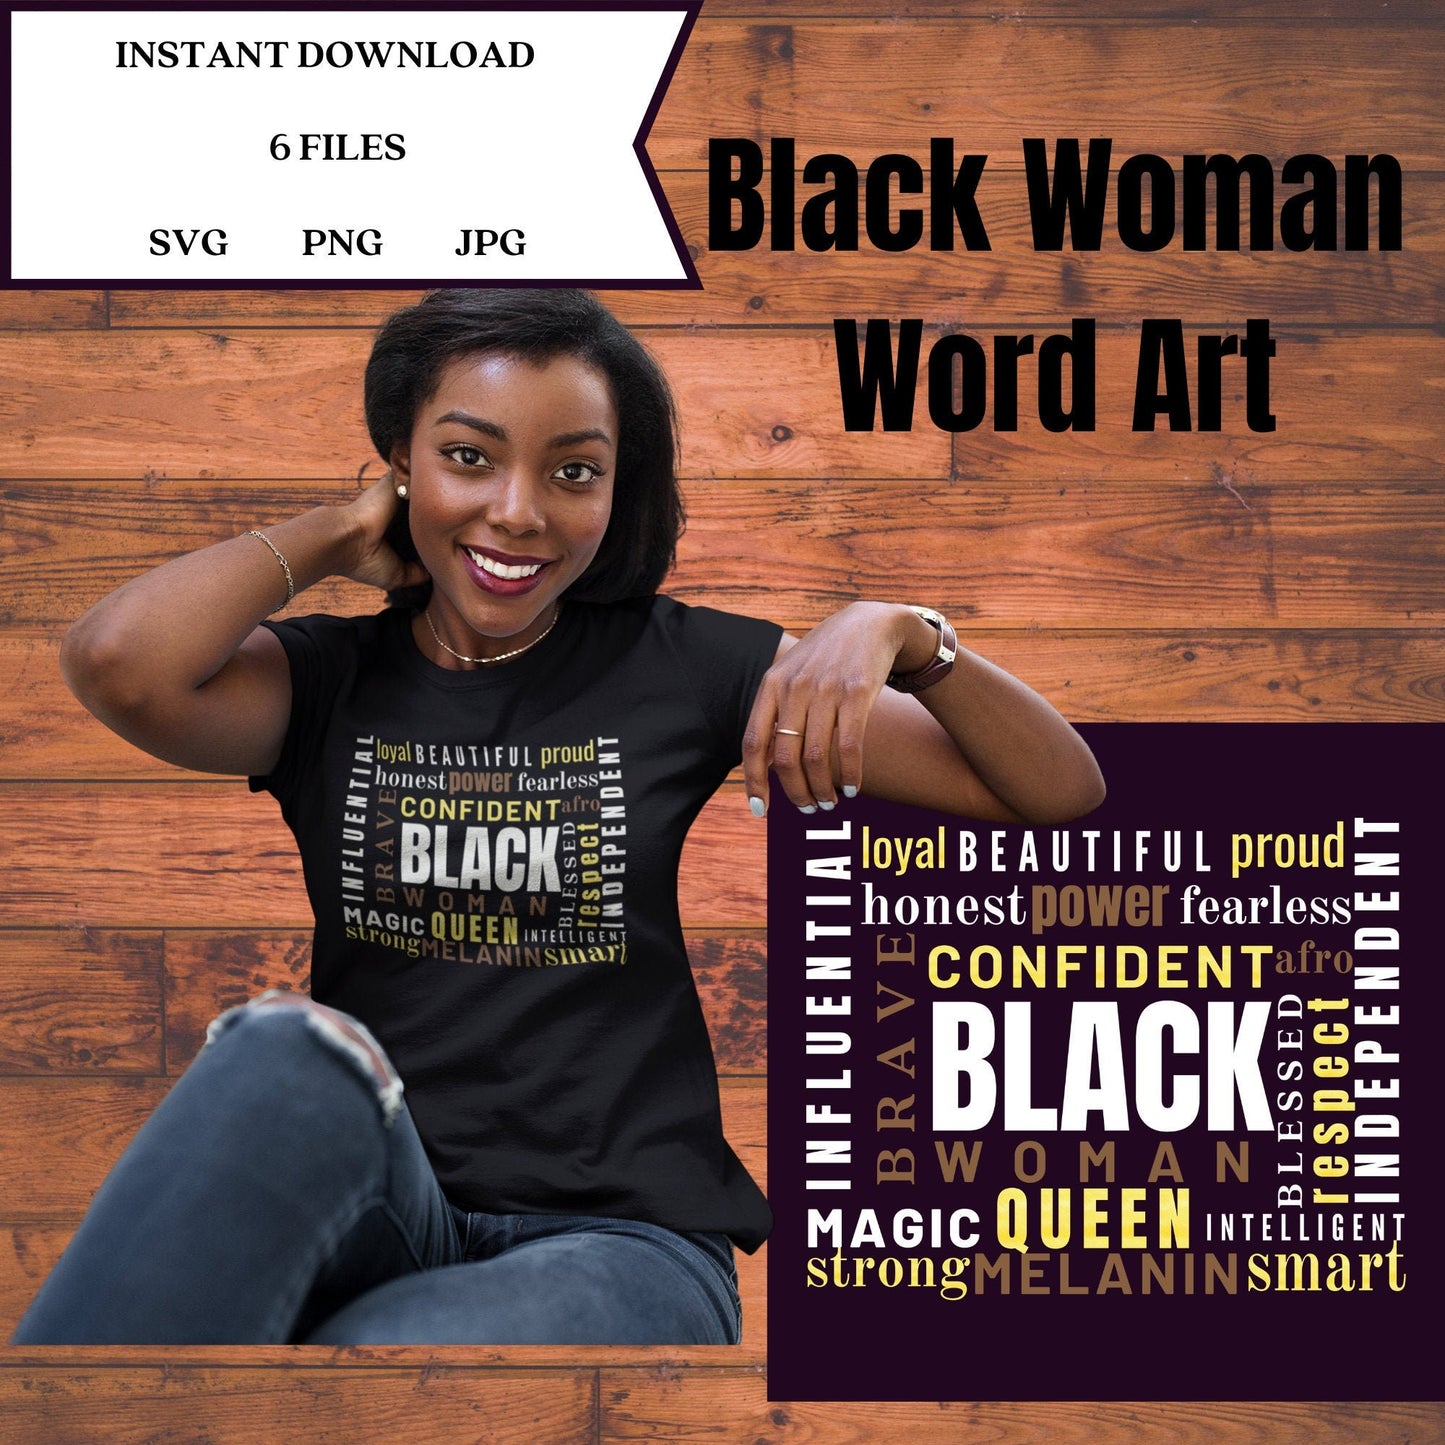 Black Woman, Black Woman Word Art, Black Lives Matter, Black History Month, SVG for Cricut and Silhouette - SthrngurlCreations